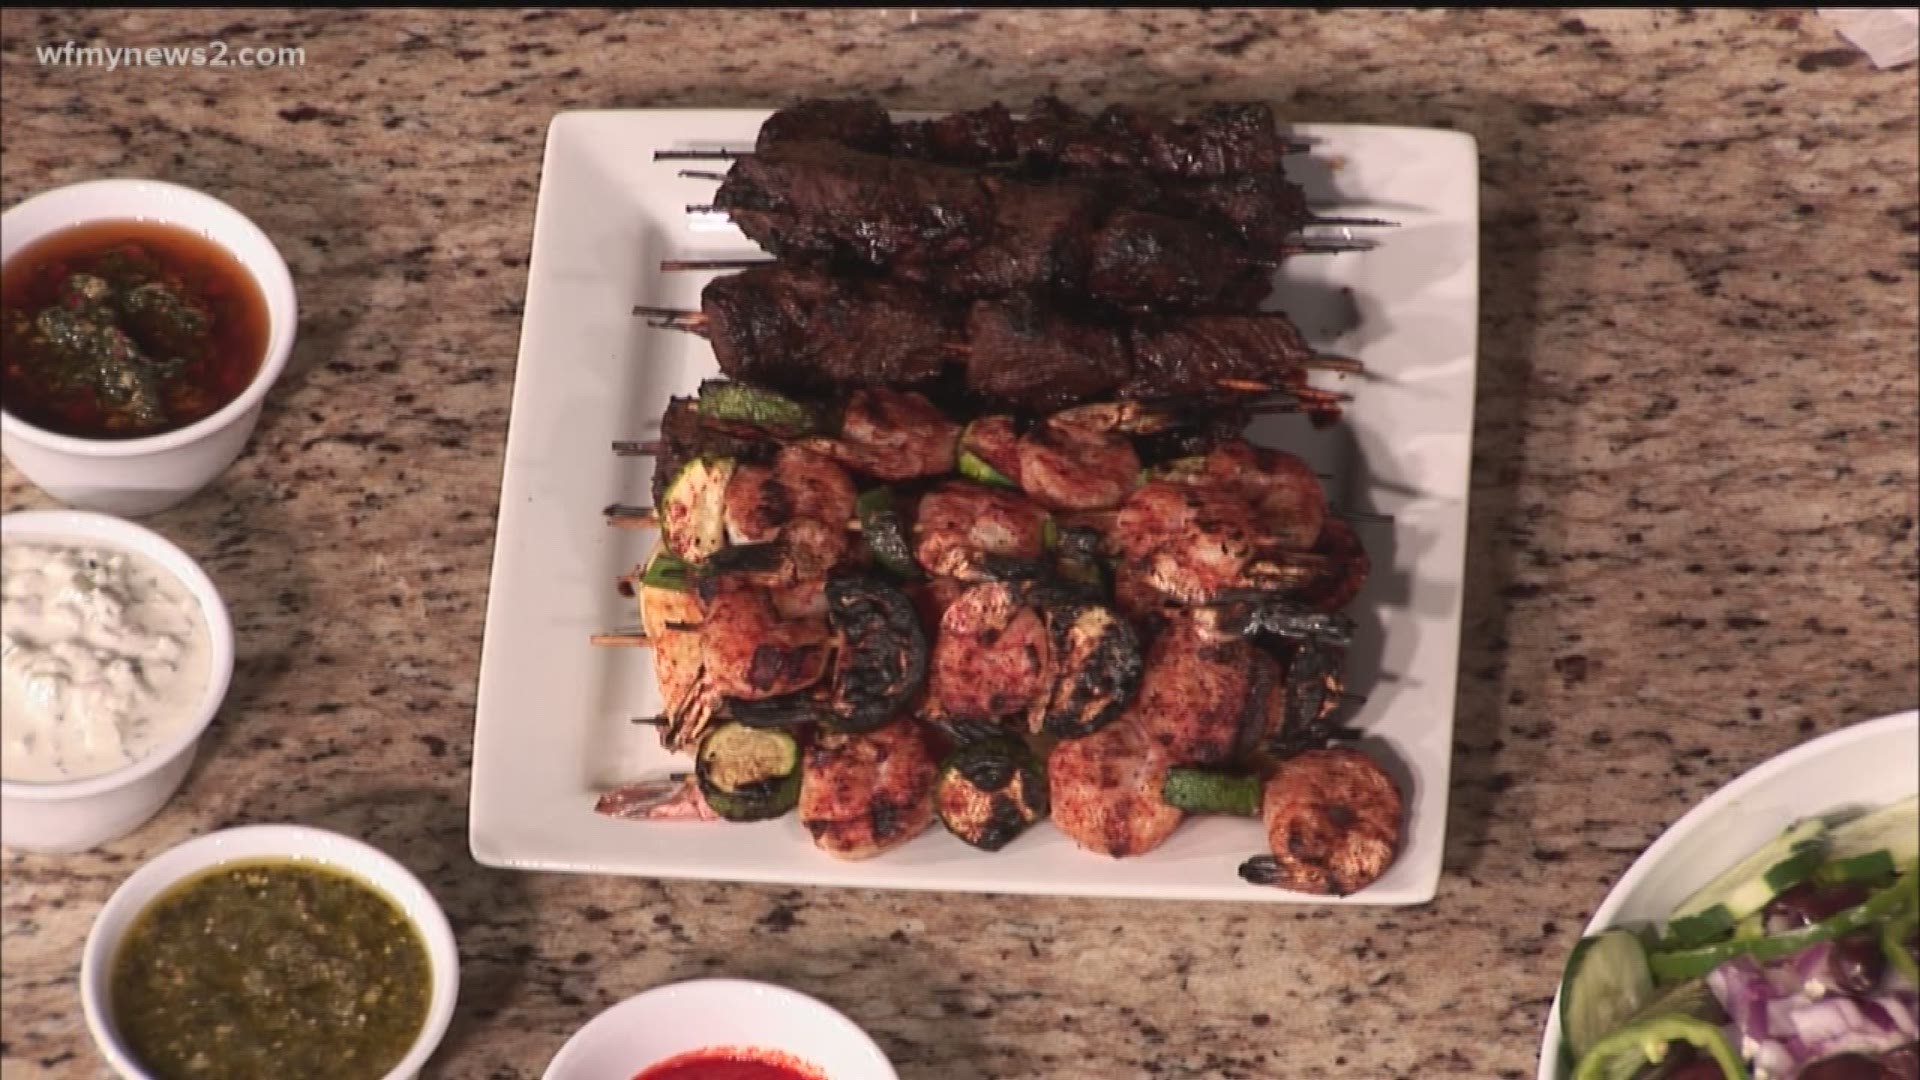 Erin Williams is back in the studio to share a fun summer recipe for steak kabobs that anyone can try.